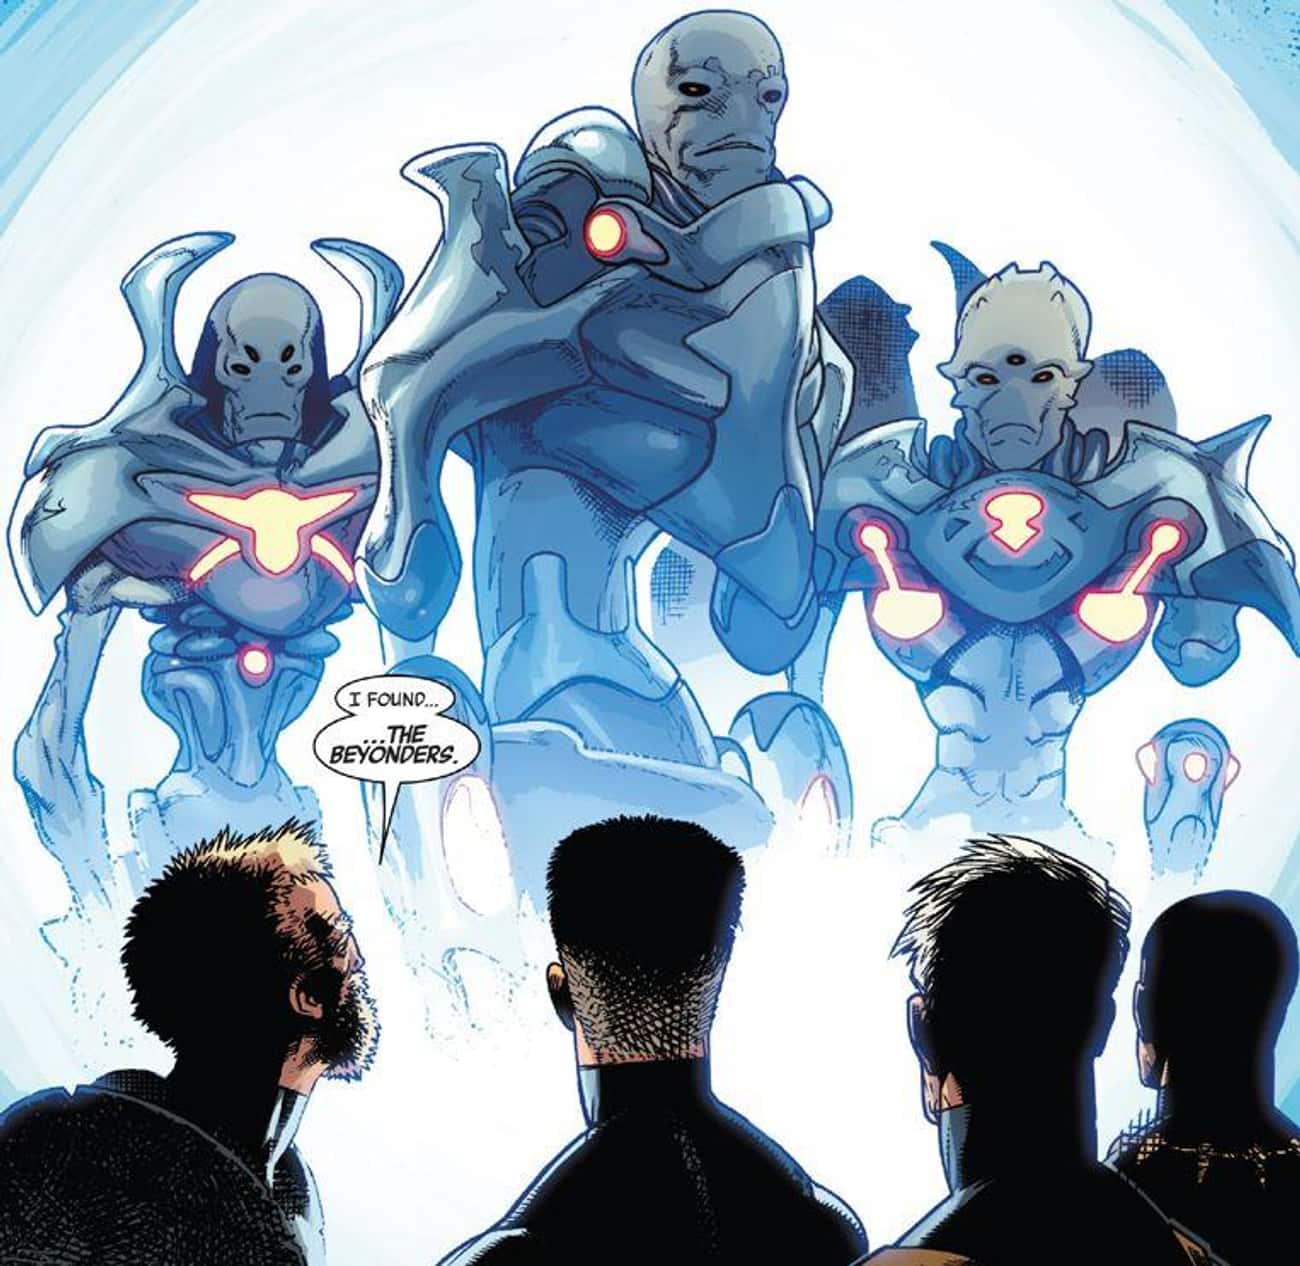 The Beyonders Are Marvel’s Corporate Powers